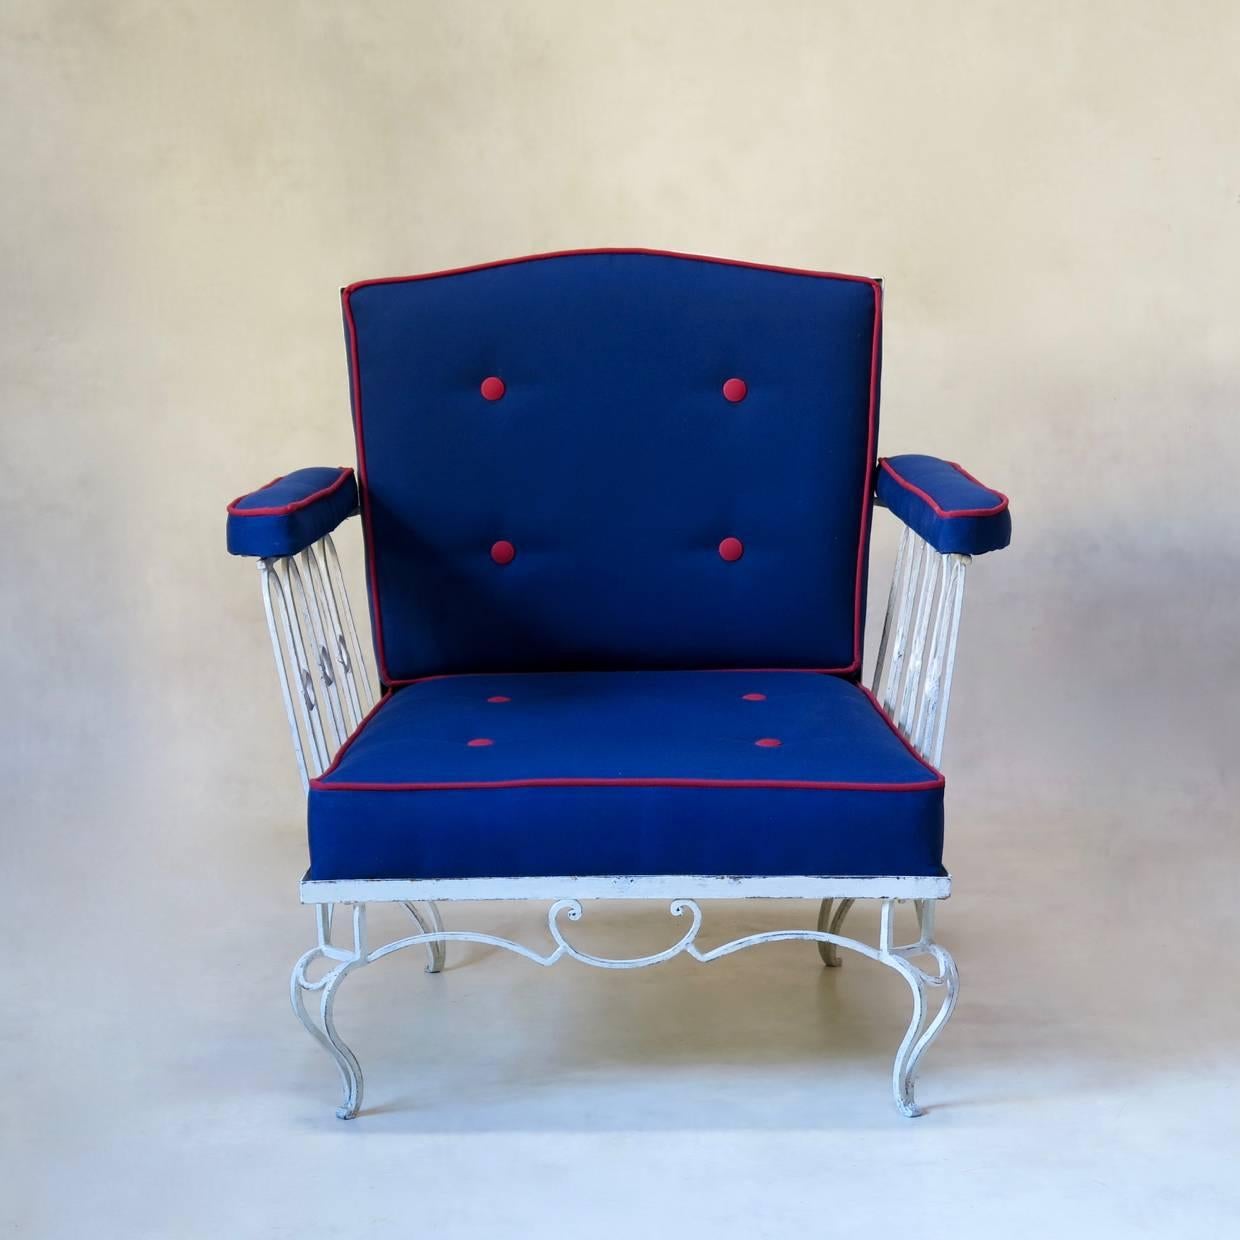 Elegant pair of low painted iron armchairs, in the style of René Prou, René Drouet, Jean-Charles Moreux... Raised on short cabriole legs. Slight moustache-shaped crest. Upholstered in outdoor fabric.